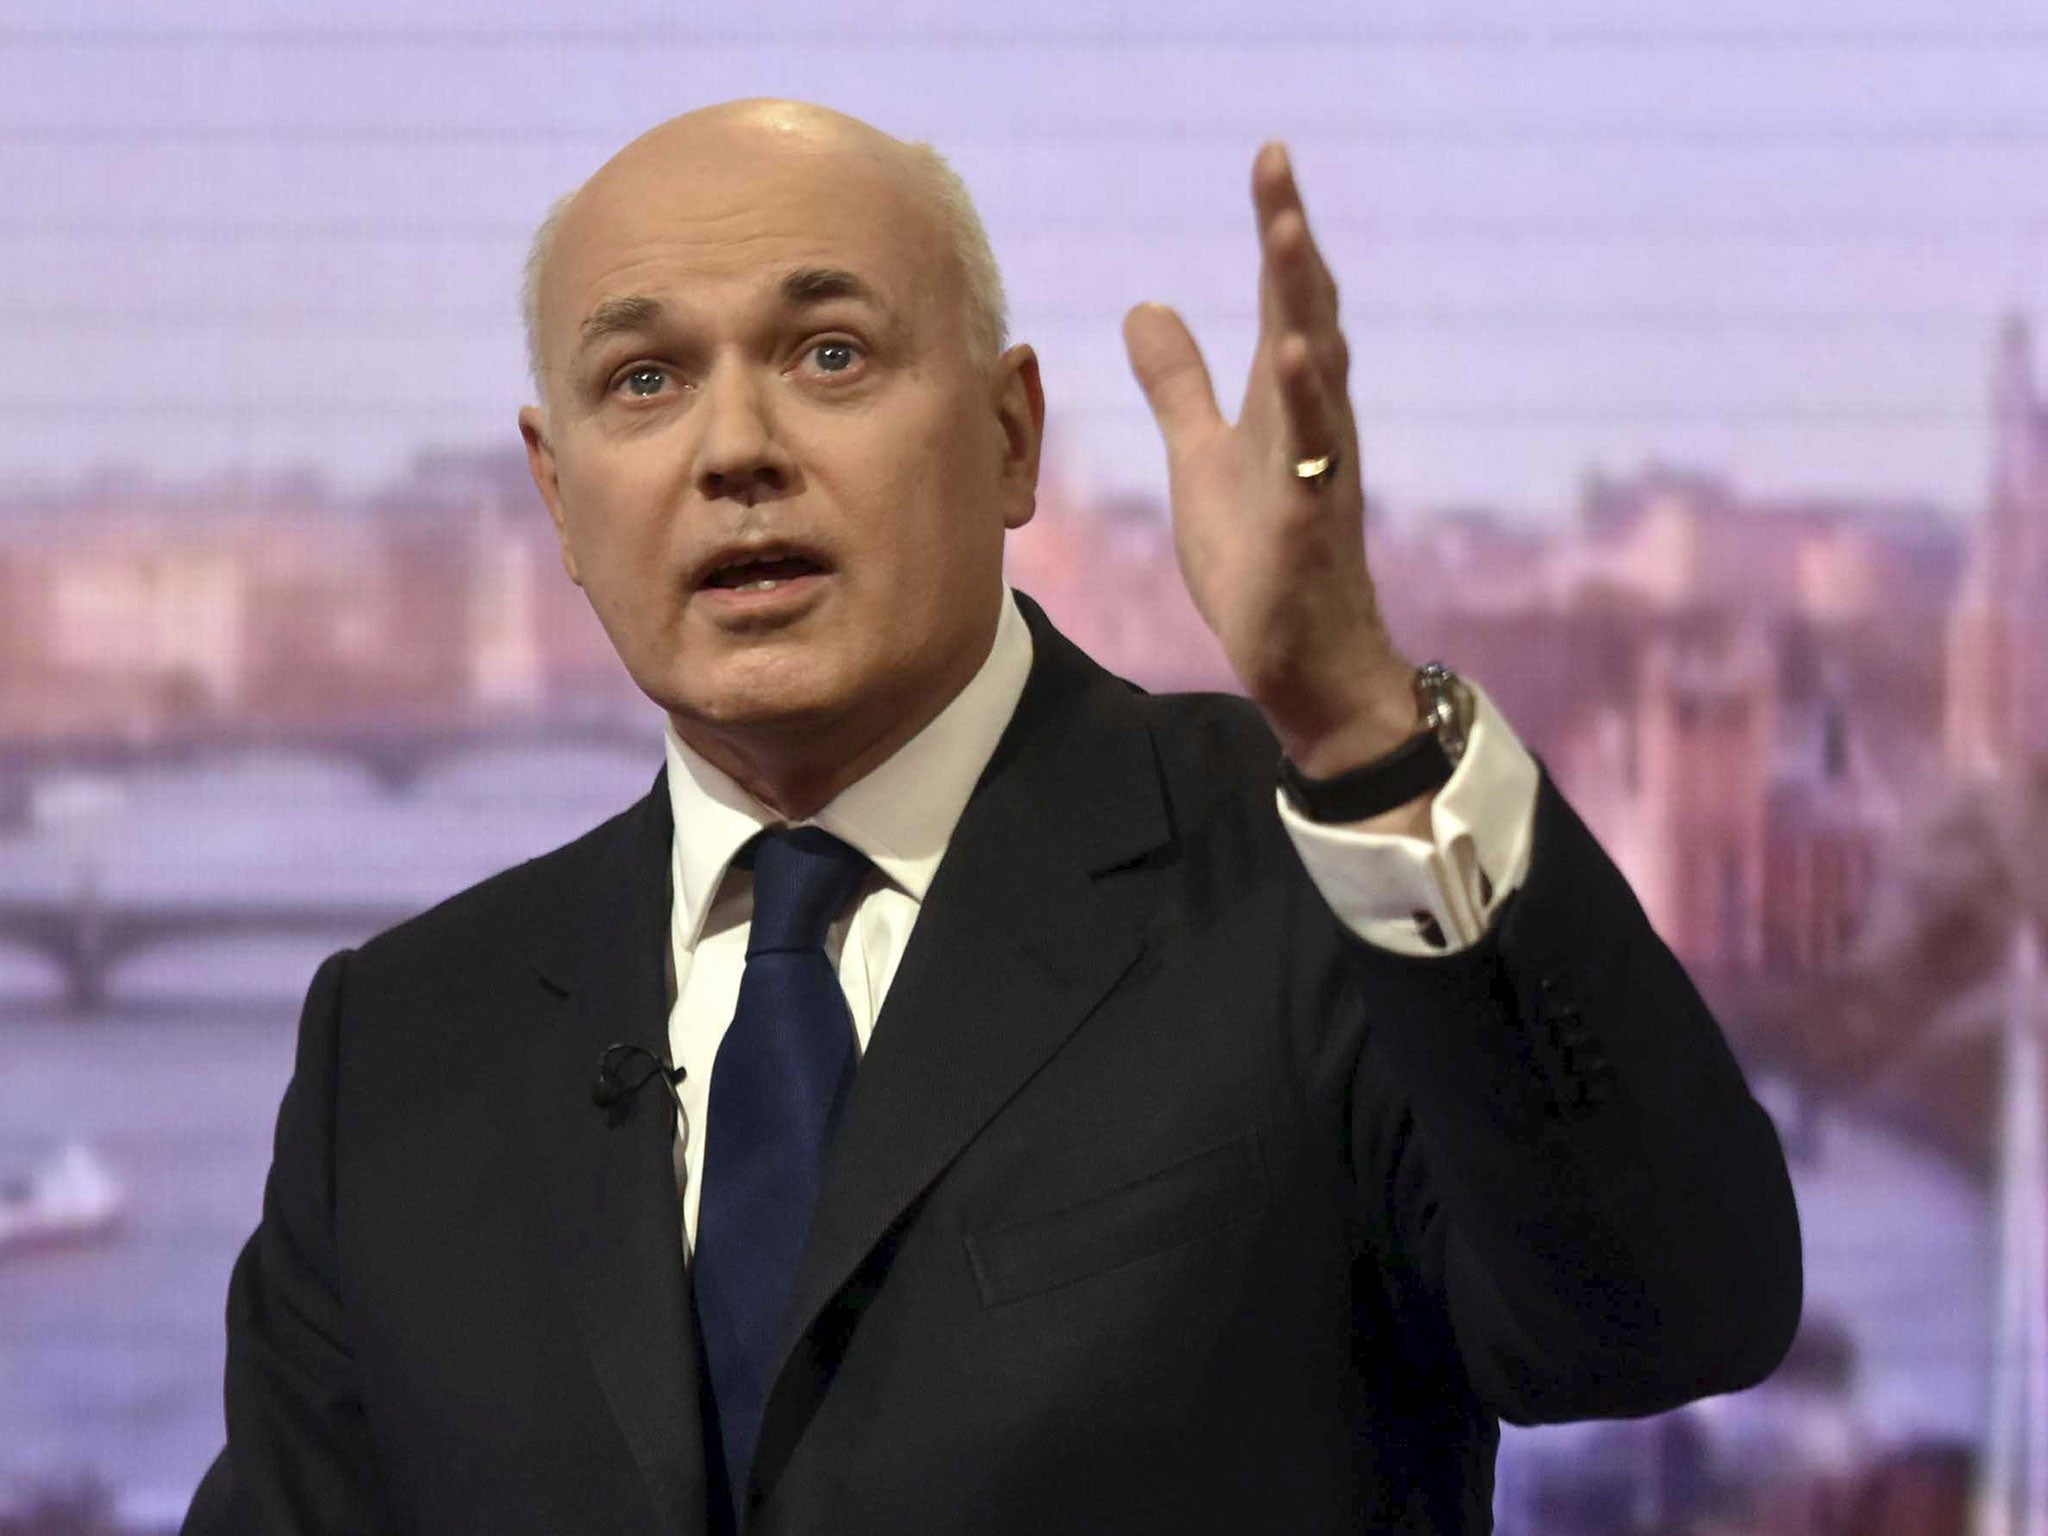 Iain Duncan Smith, Secretary of State for Work and Pensions